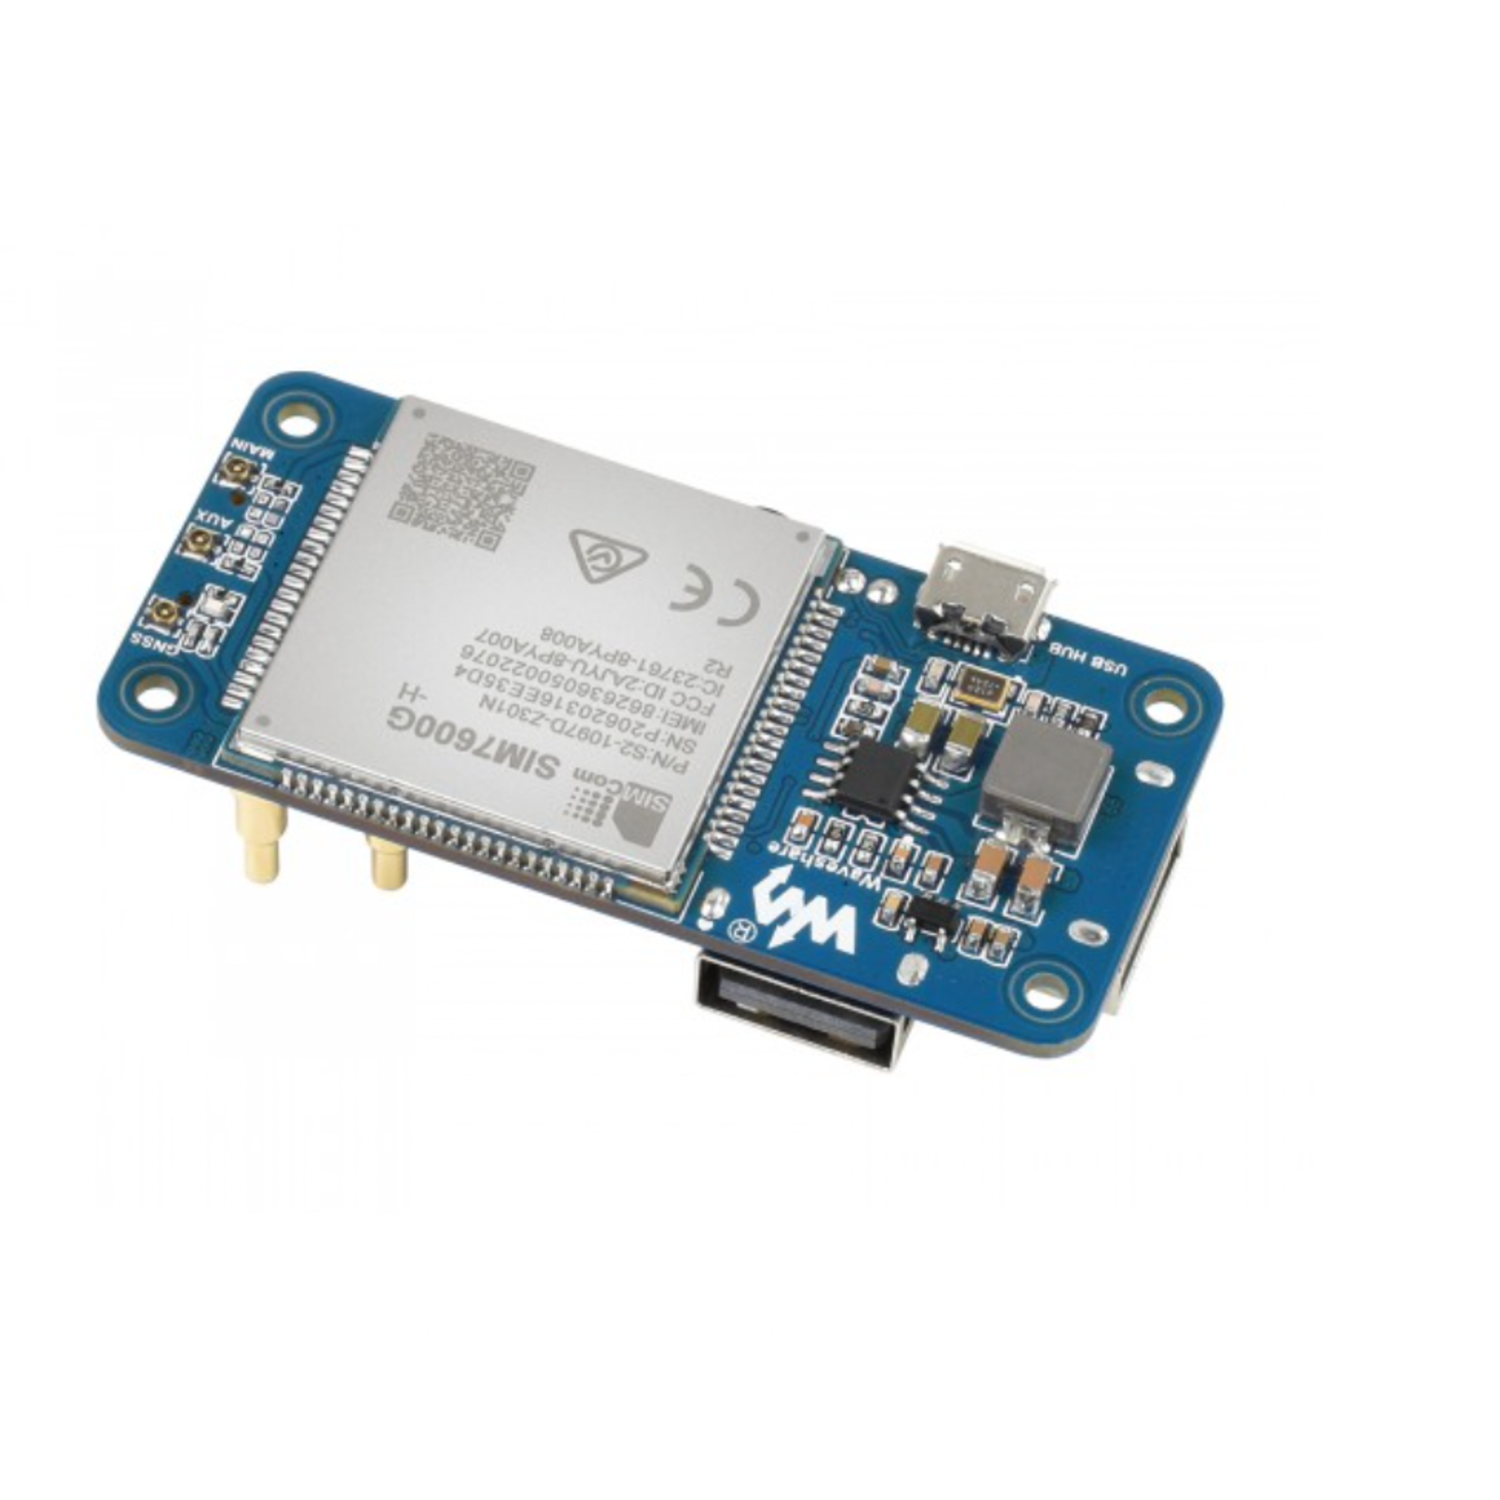 SIM7600G-H 4G HAT (B) for Raspberry Pi, LTE Cat-4 4G / 3G / 2G Support, GNSS Positioning, Global Band